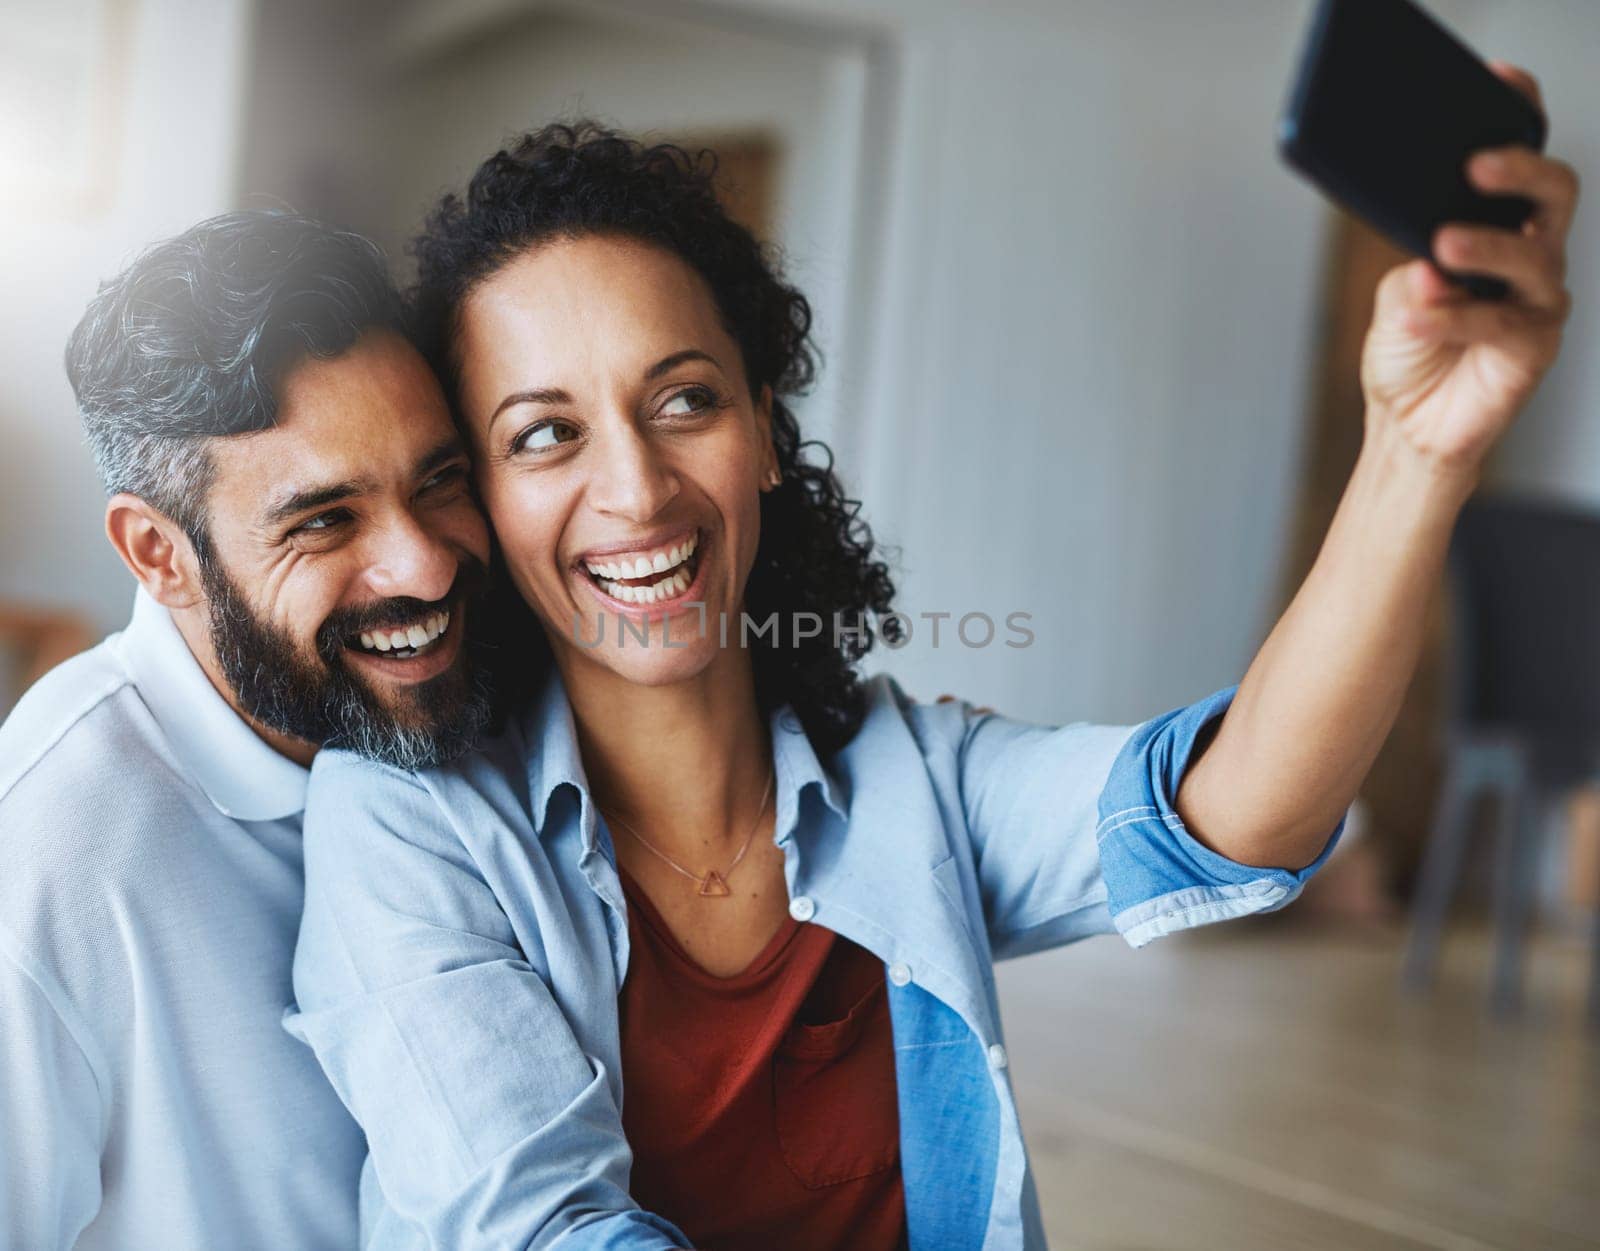 Happy couple, smile and selfie for profile picture, social media or vlog together relaxing at home. Man and woman in relationship smiling for photo, online post or memory and bonding in living room.